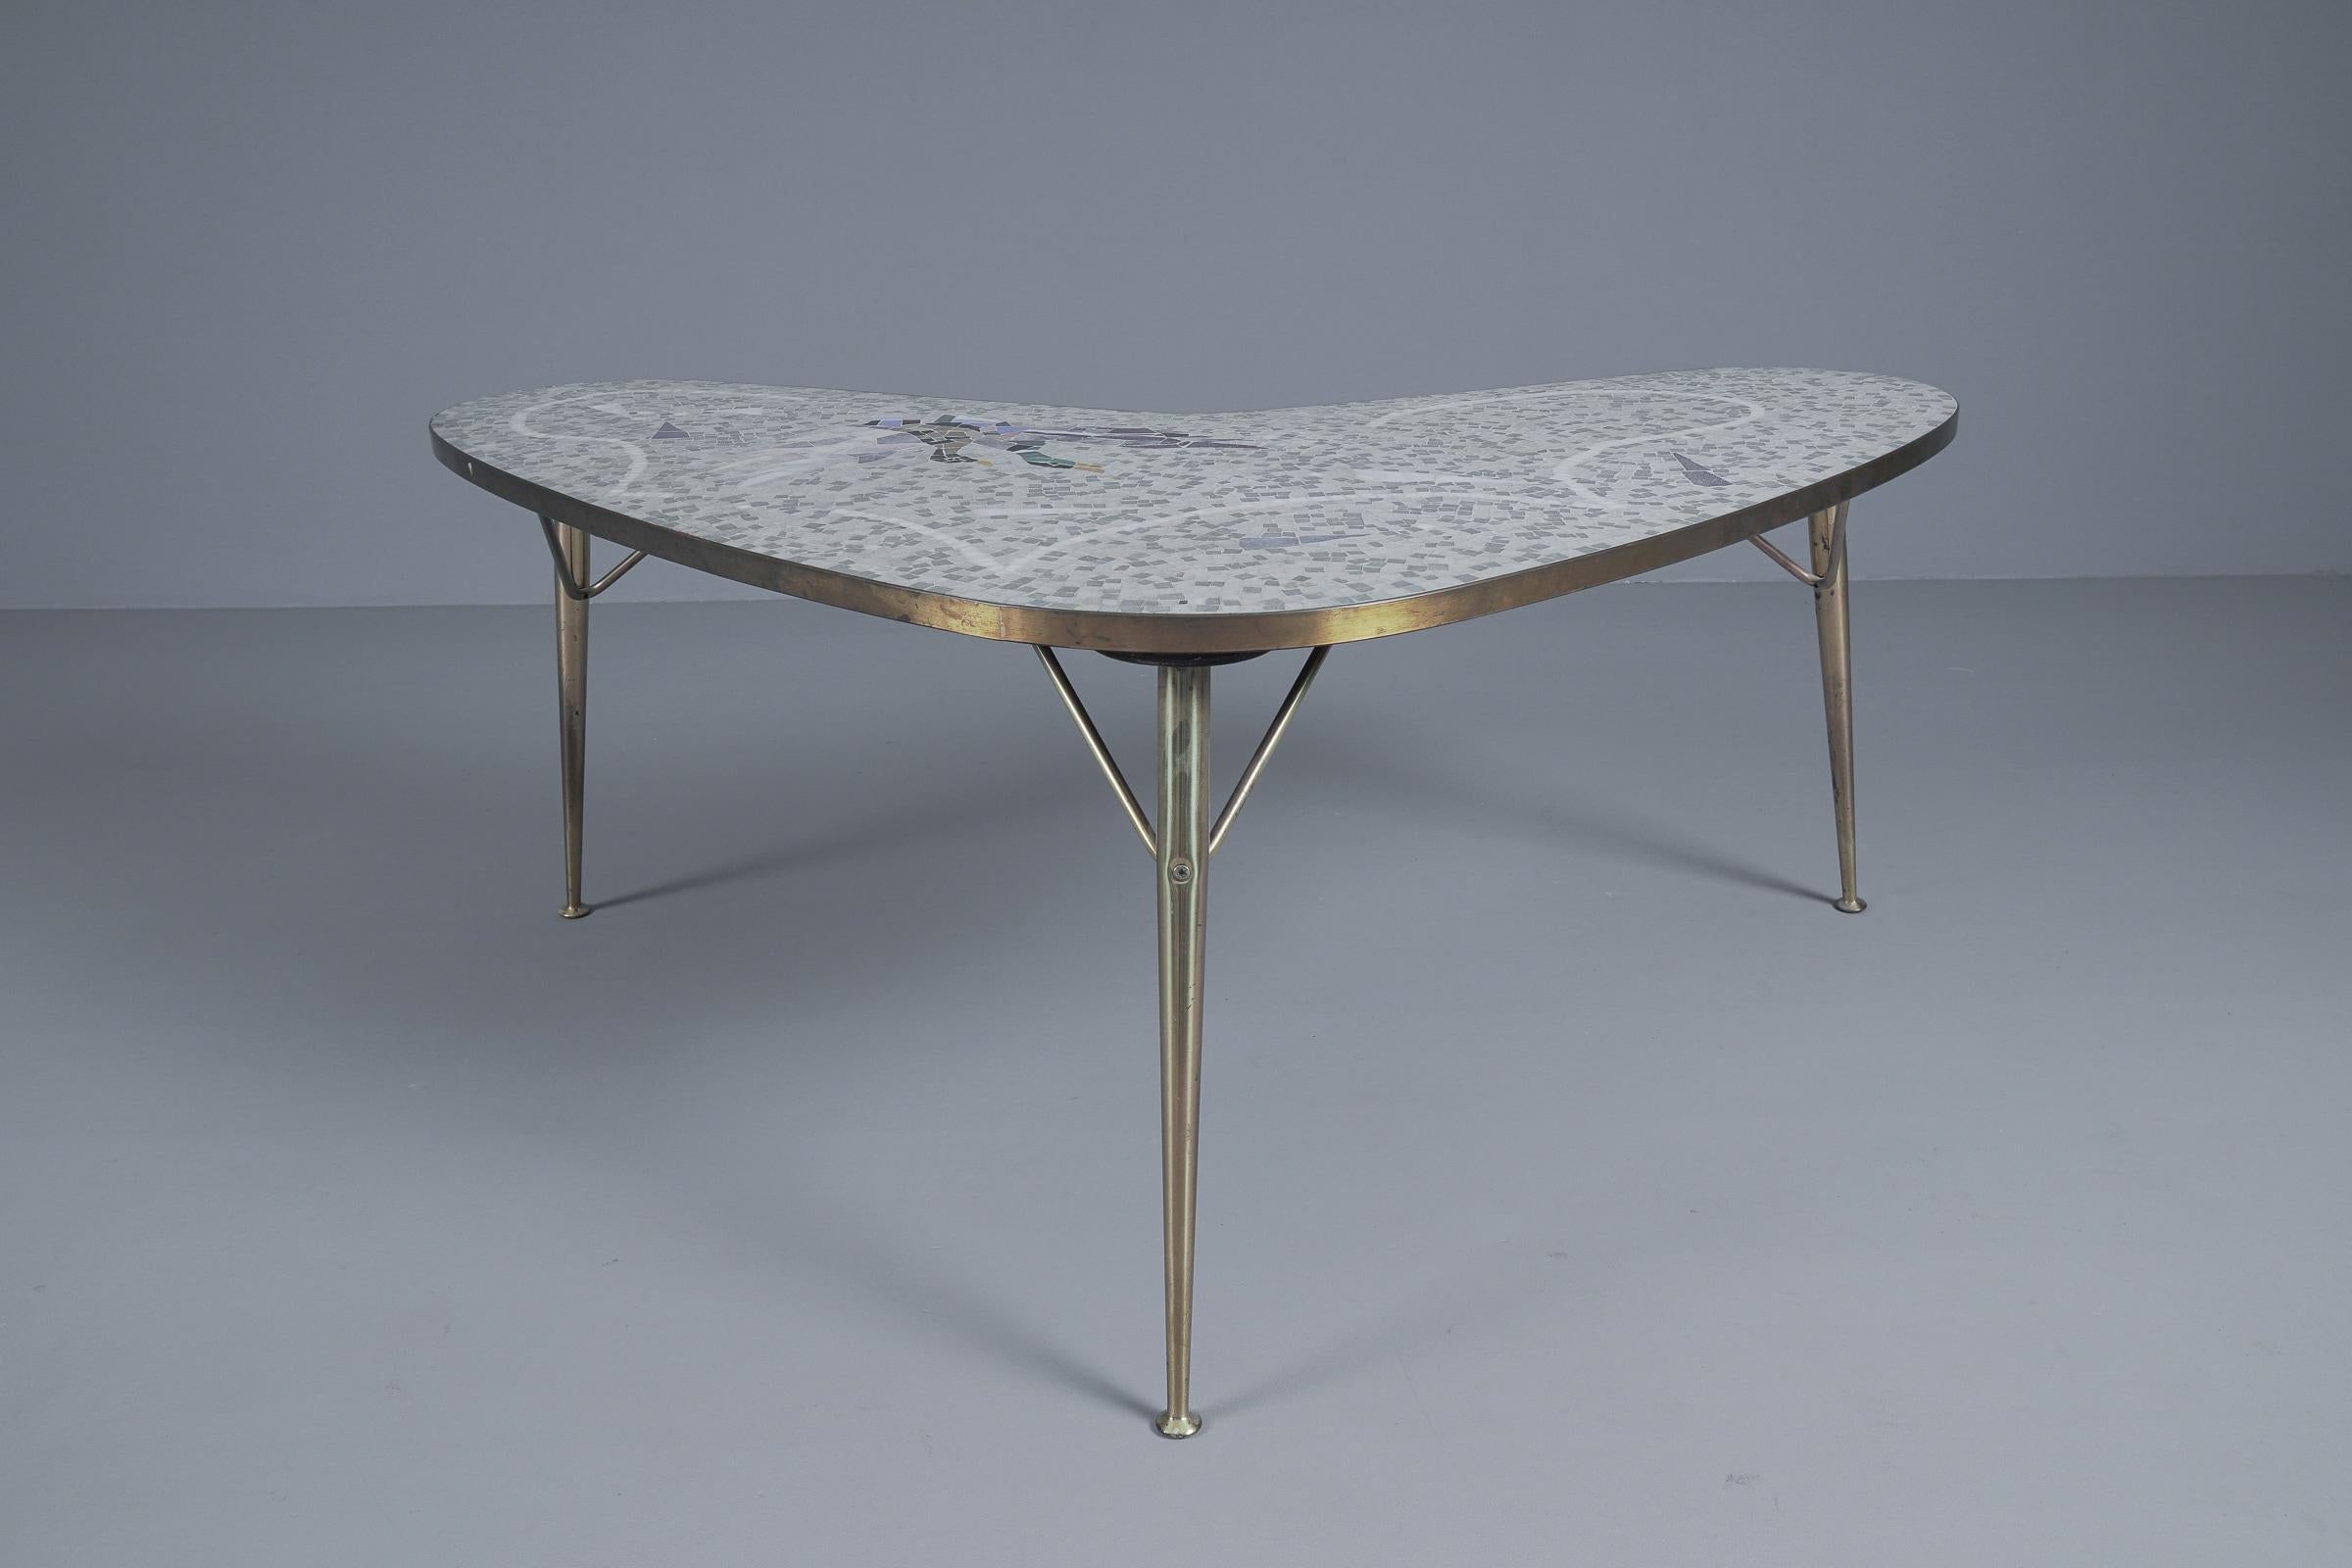 Mosaic and Brass Boomerang Coffee Table by Berthold Müller-oerlinghausen In Good Condition For Sale In Nürnberg, Bayern